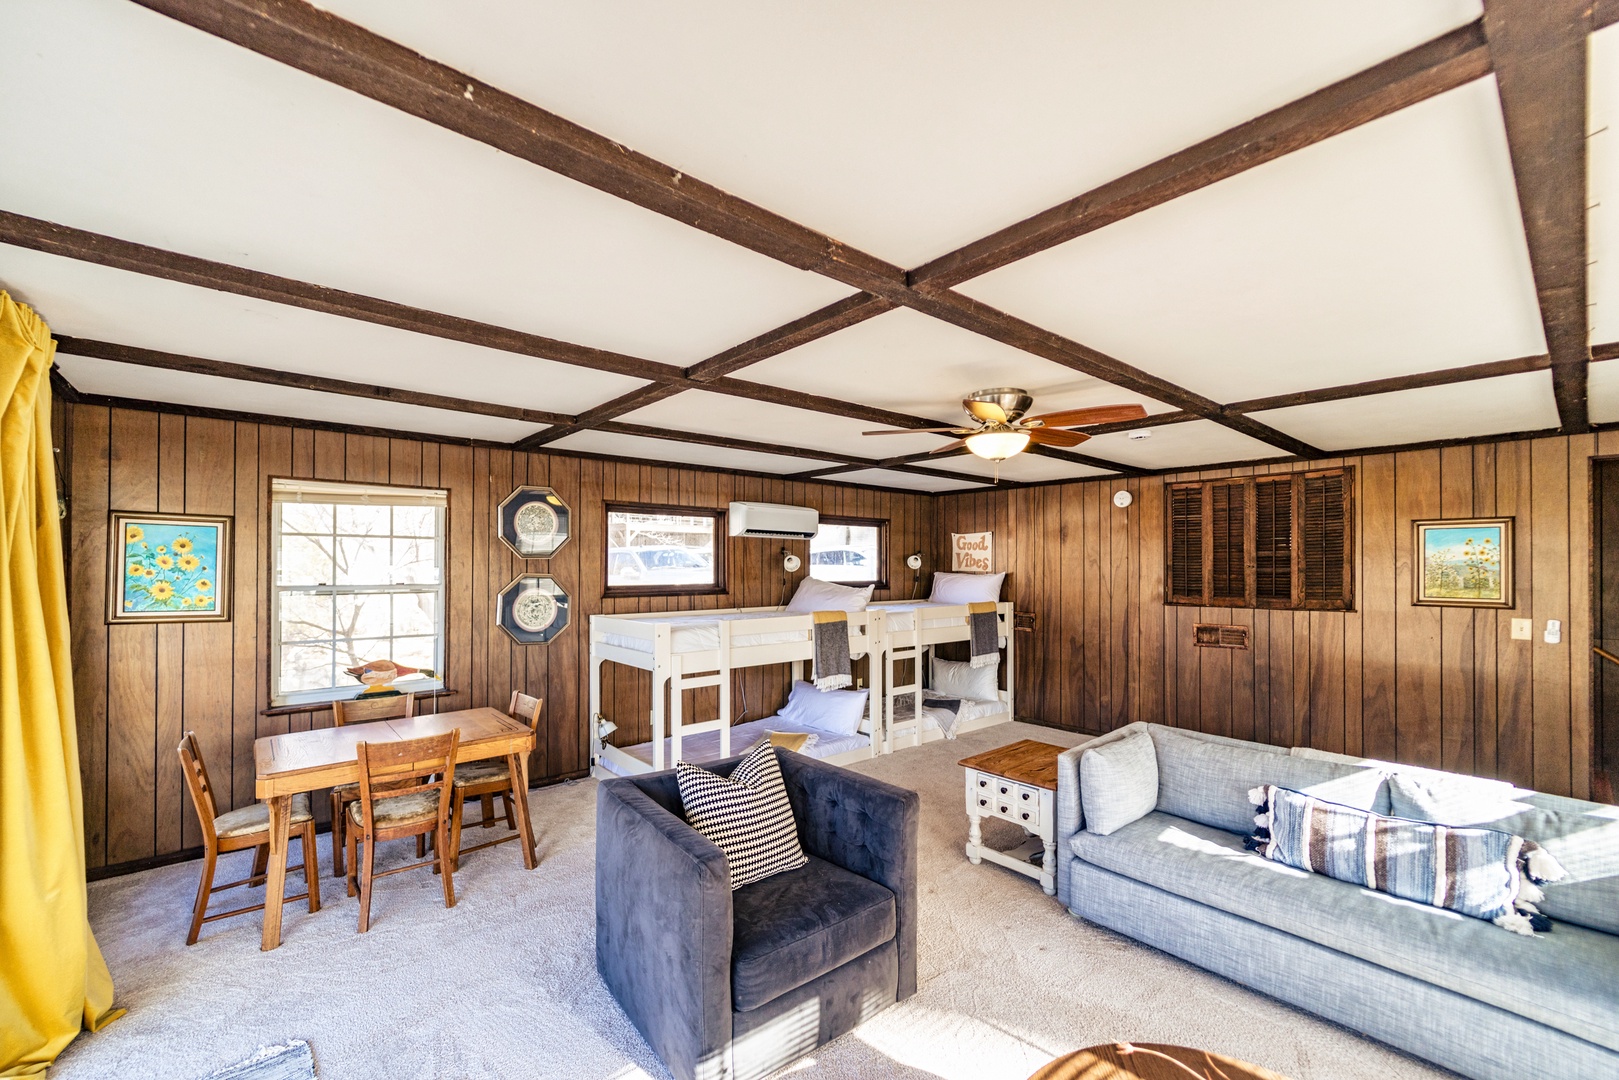 The secondary living area includes a queen sleeper sofa & twin bunkbeds